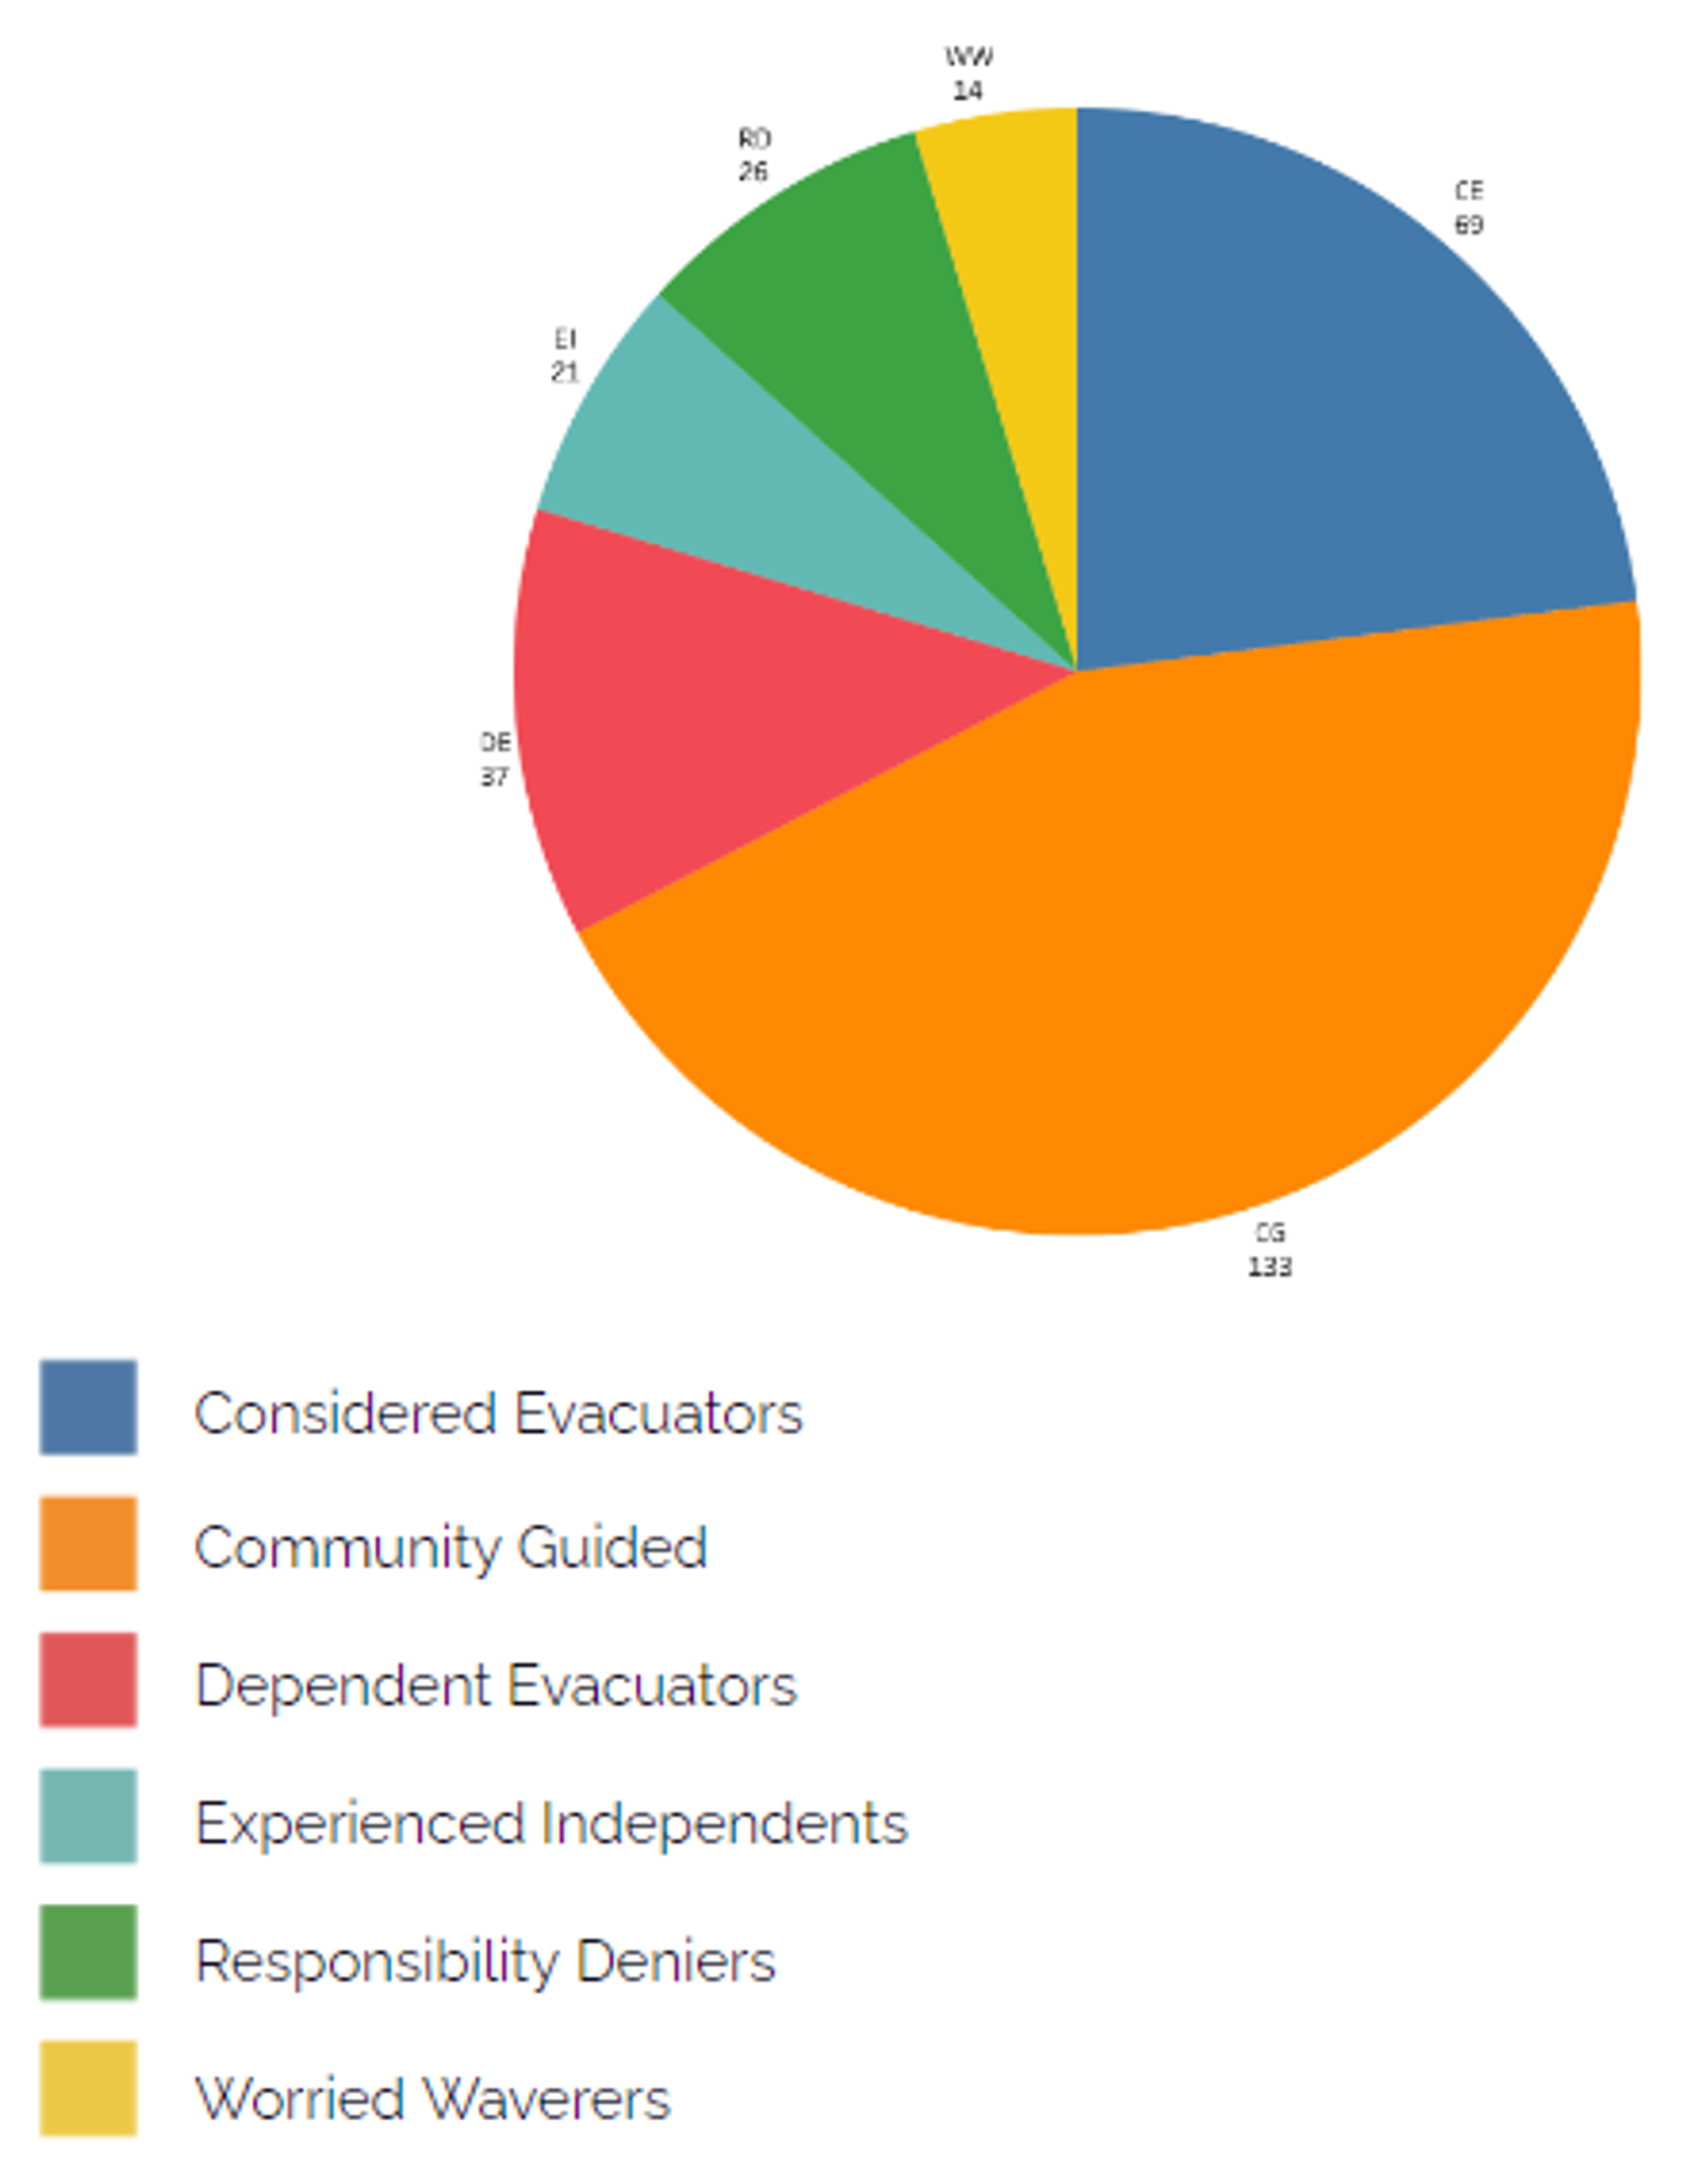 Detailed breakdown of Bushfire Archetypes captured using our tool. 